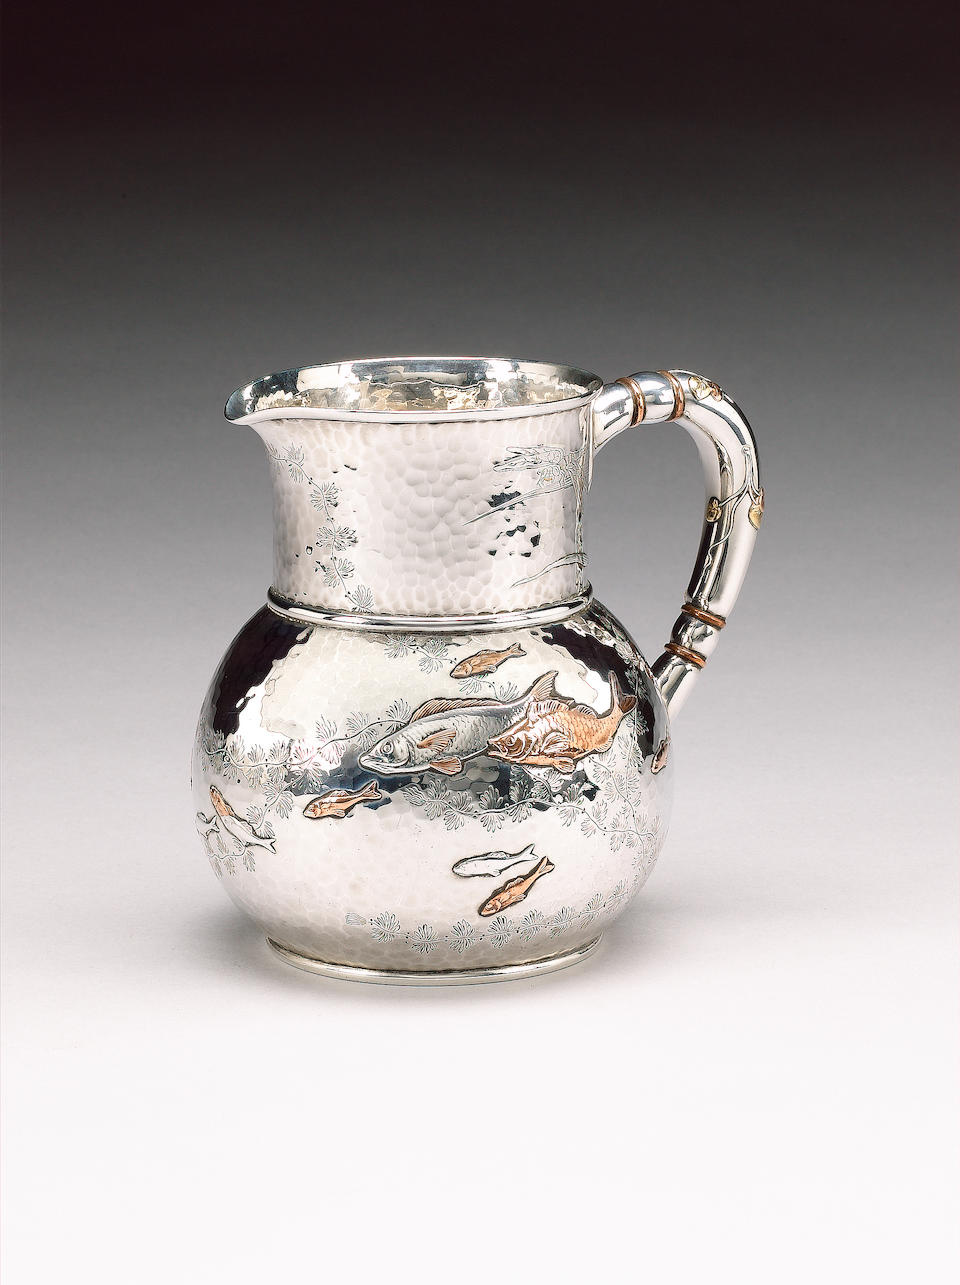 A late 19th century American silver and mixed metals pitcher, by Tiffany and Company, New York, circ